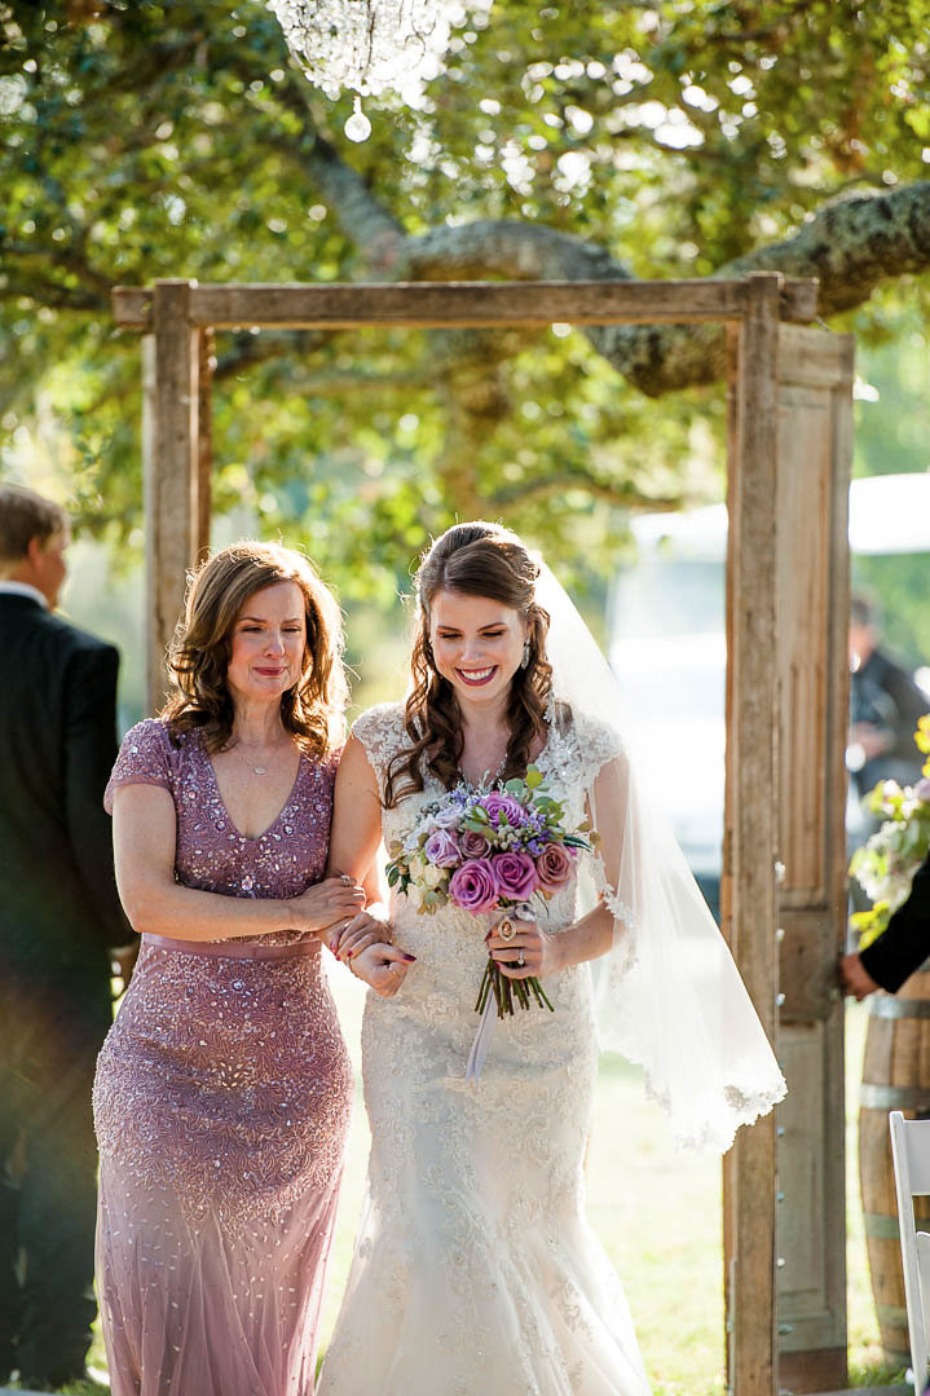 Mom walks daughter down the aisle